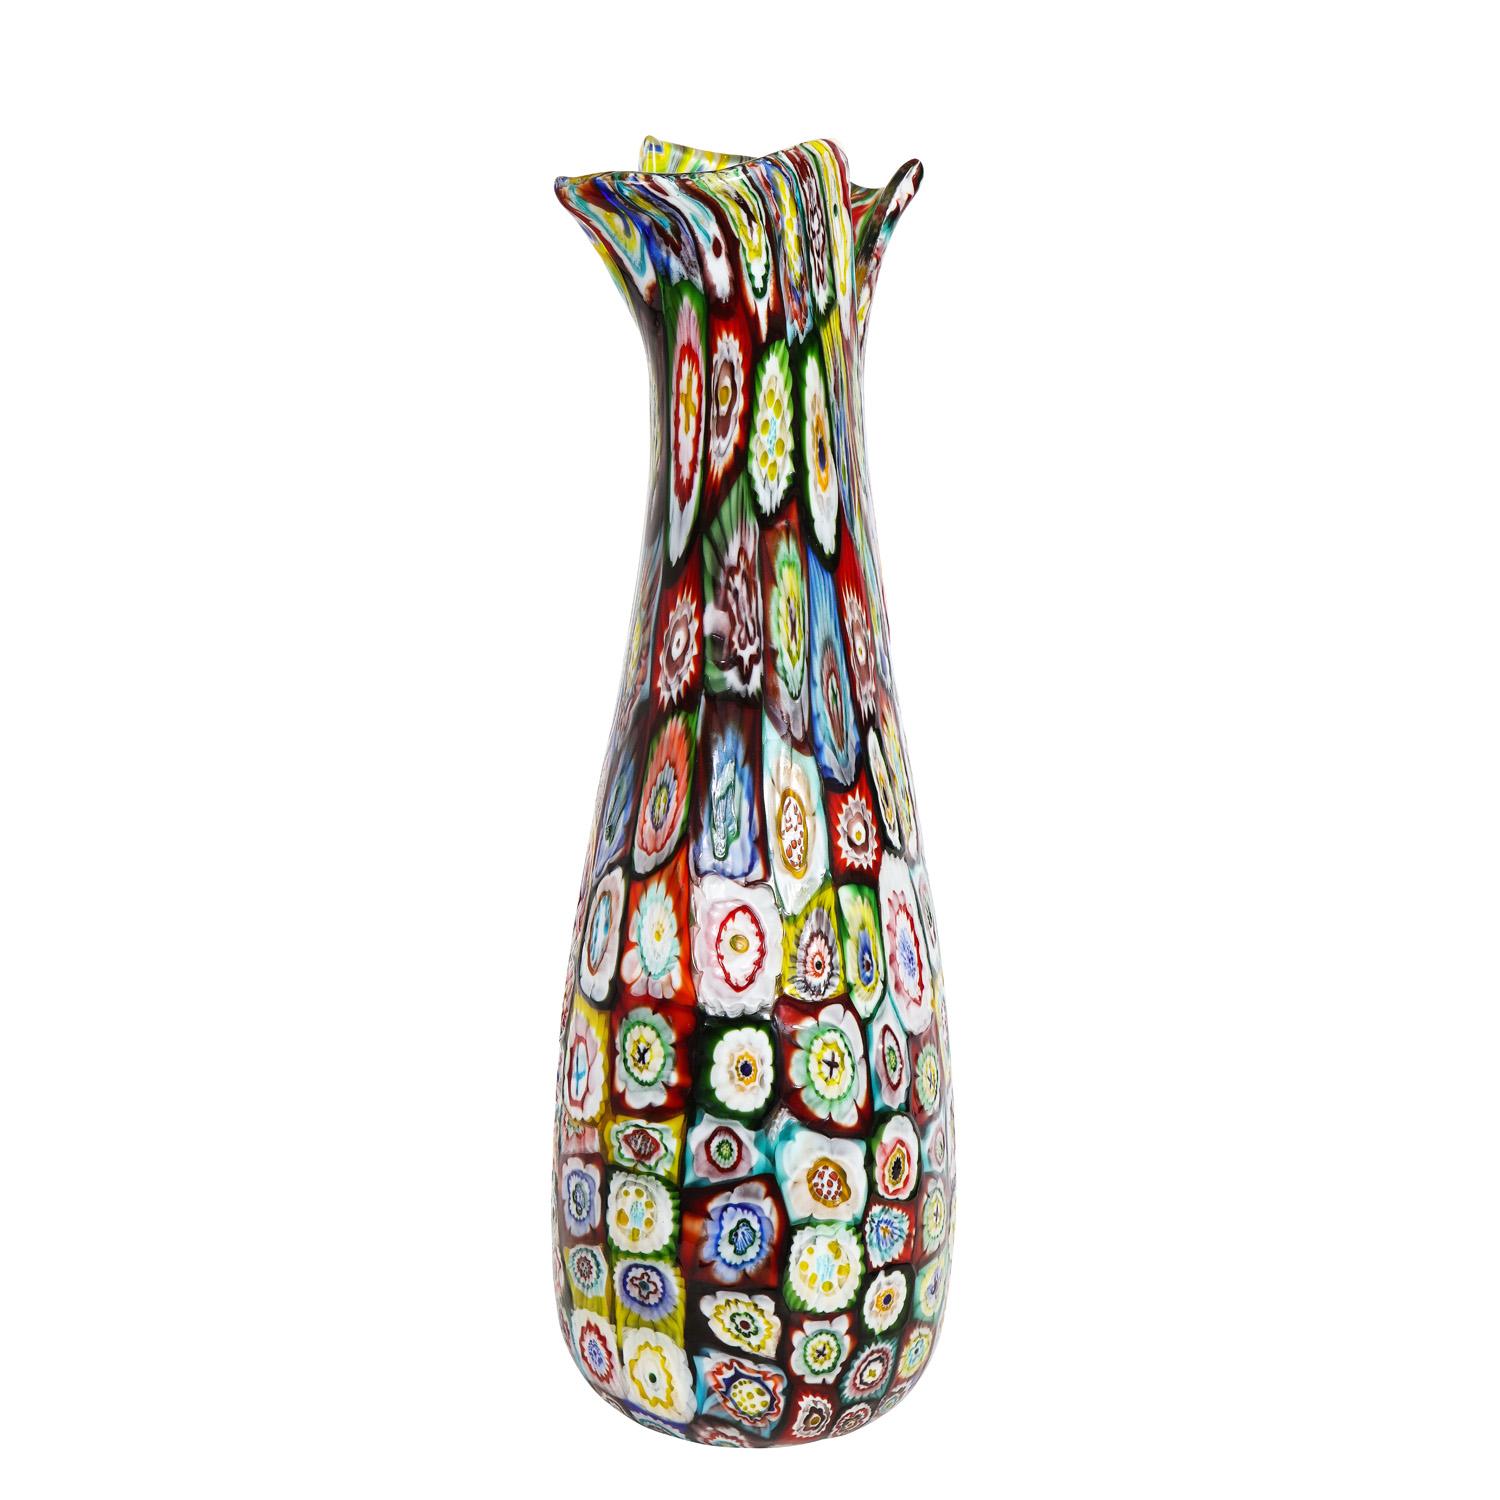 Large hand-blown glass vase with complex colorful murrhines from the “Murrine Giganti” Series by Arte Vetraria Muranese or A.VE.M., Murano Italy, c 1960. This enormous vase is simply exquisite.

Literature:
AVEM, Arte Vetraria Muranese, Artistic